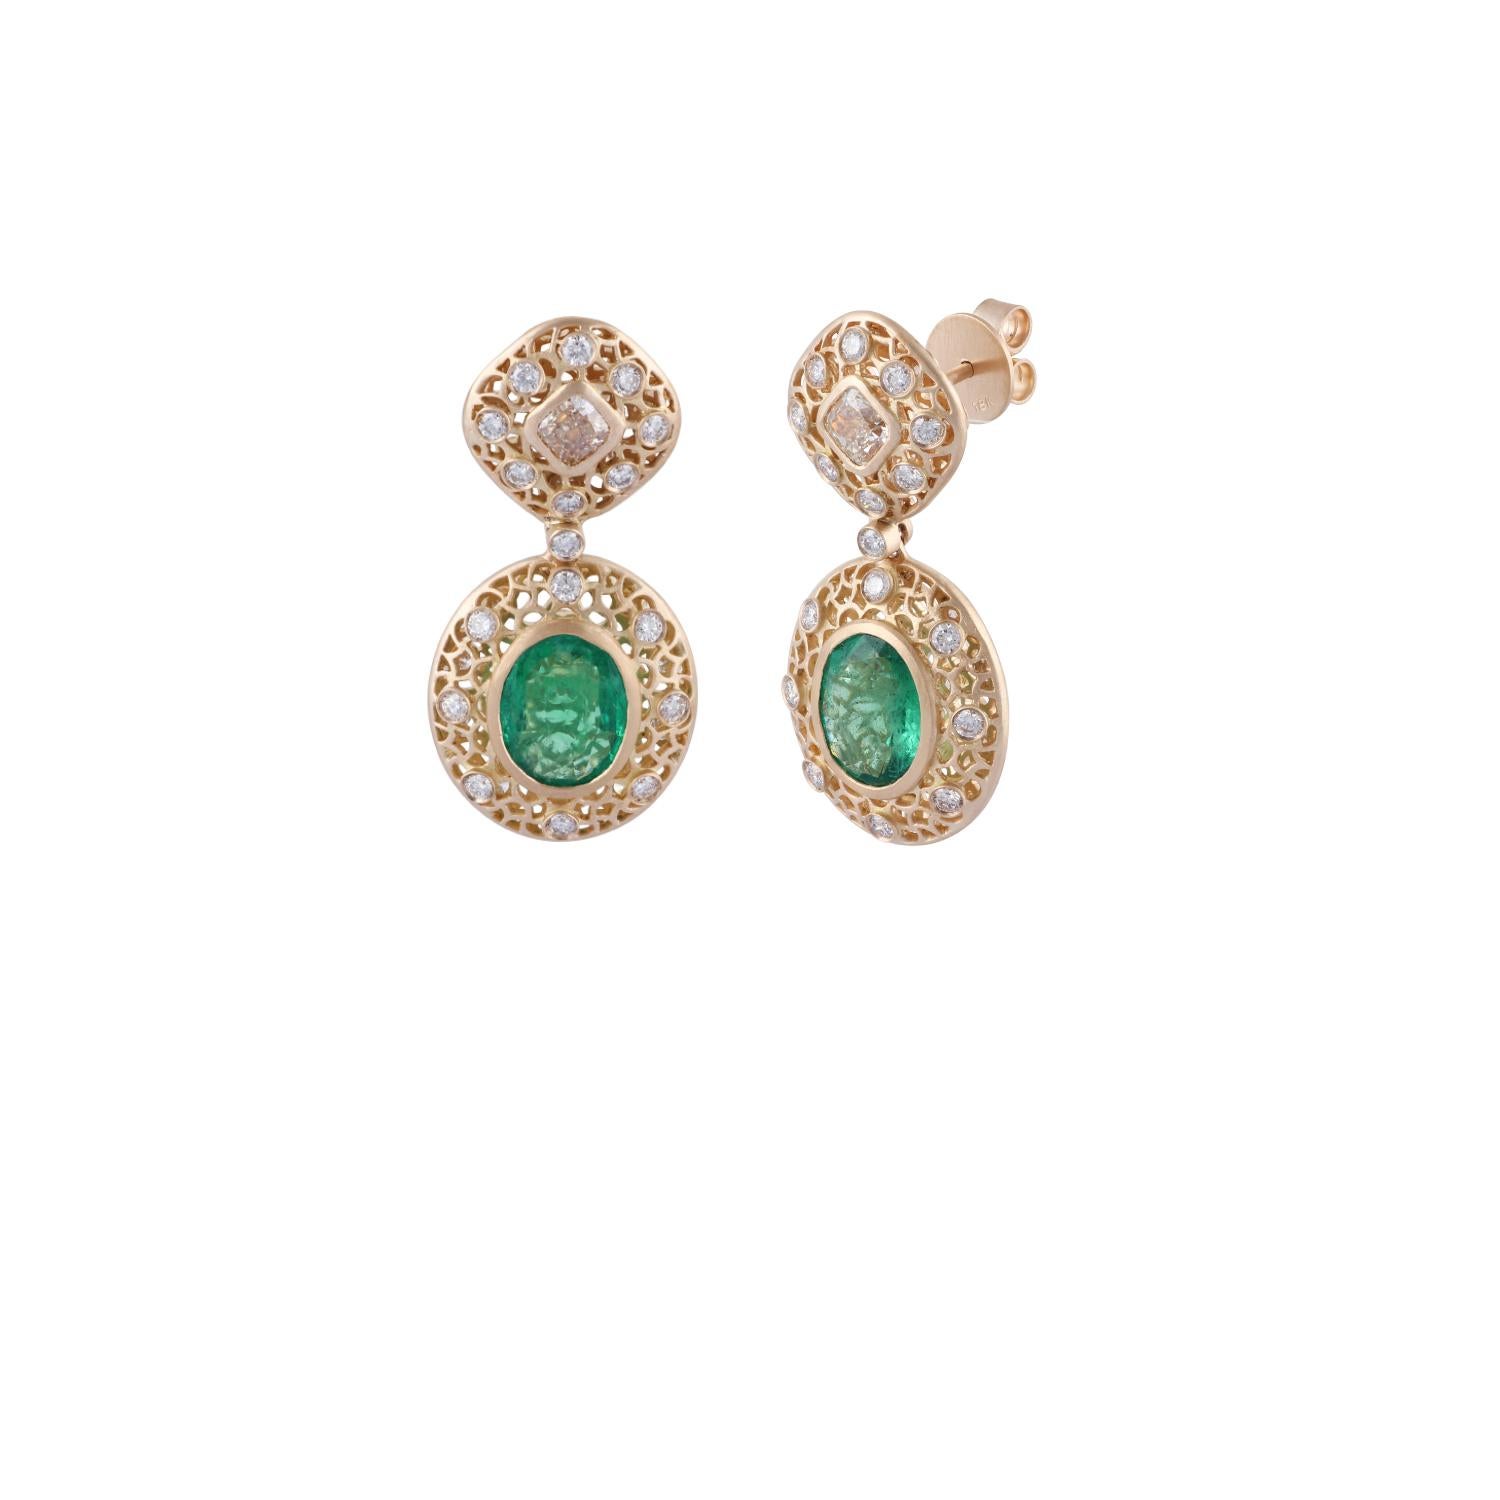 Oval Shaped Emerald - 3.85 Carats
Cushion Shaped Yellow Diamond - 1.05 Carats
Round Shaped Diamond - 2.08 Carat
Yellow Gold 18Kt. - 10.40 Grams